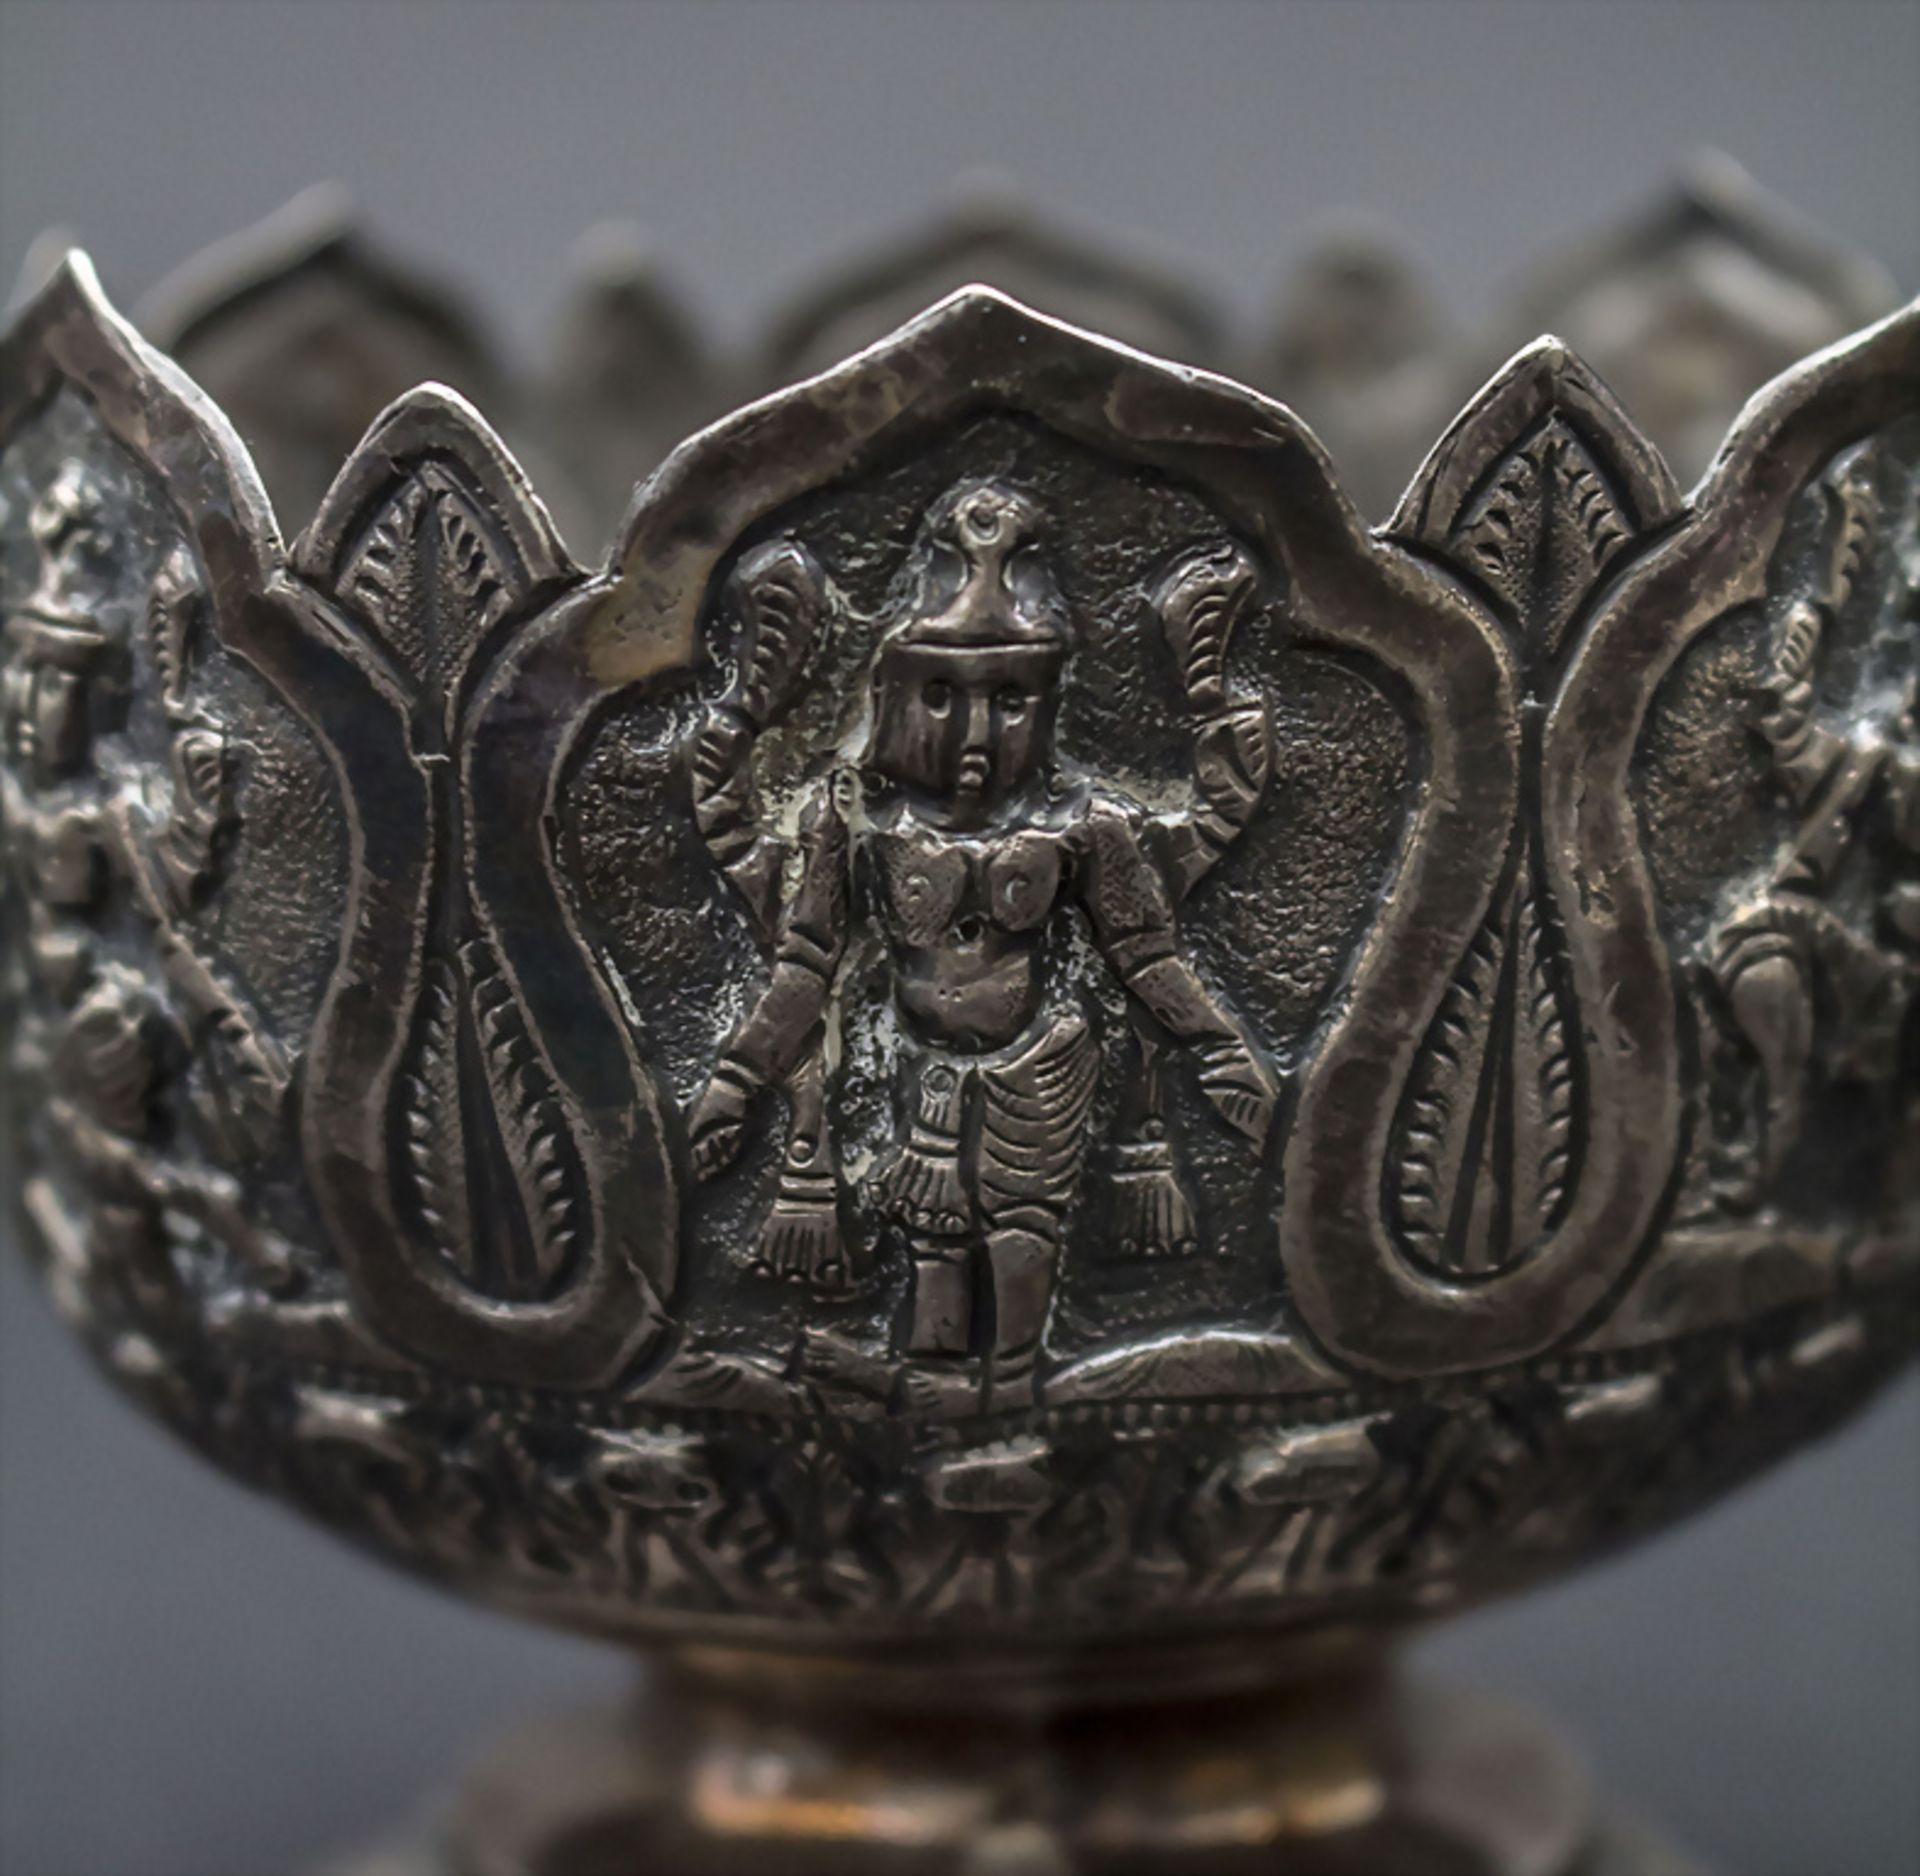 Silber Lotusschale und Becher / A silver lotus bowl and beaker, Thailand - Image 6 of 6